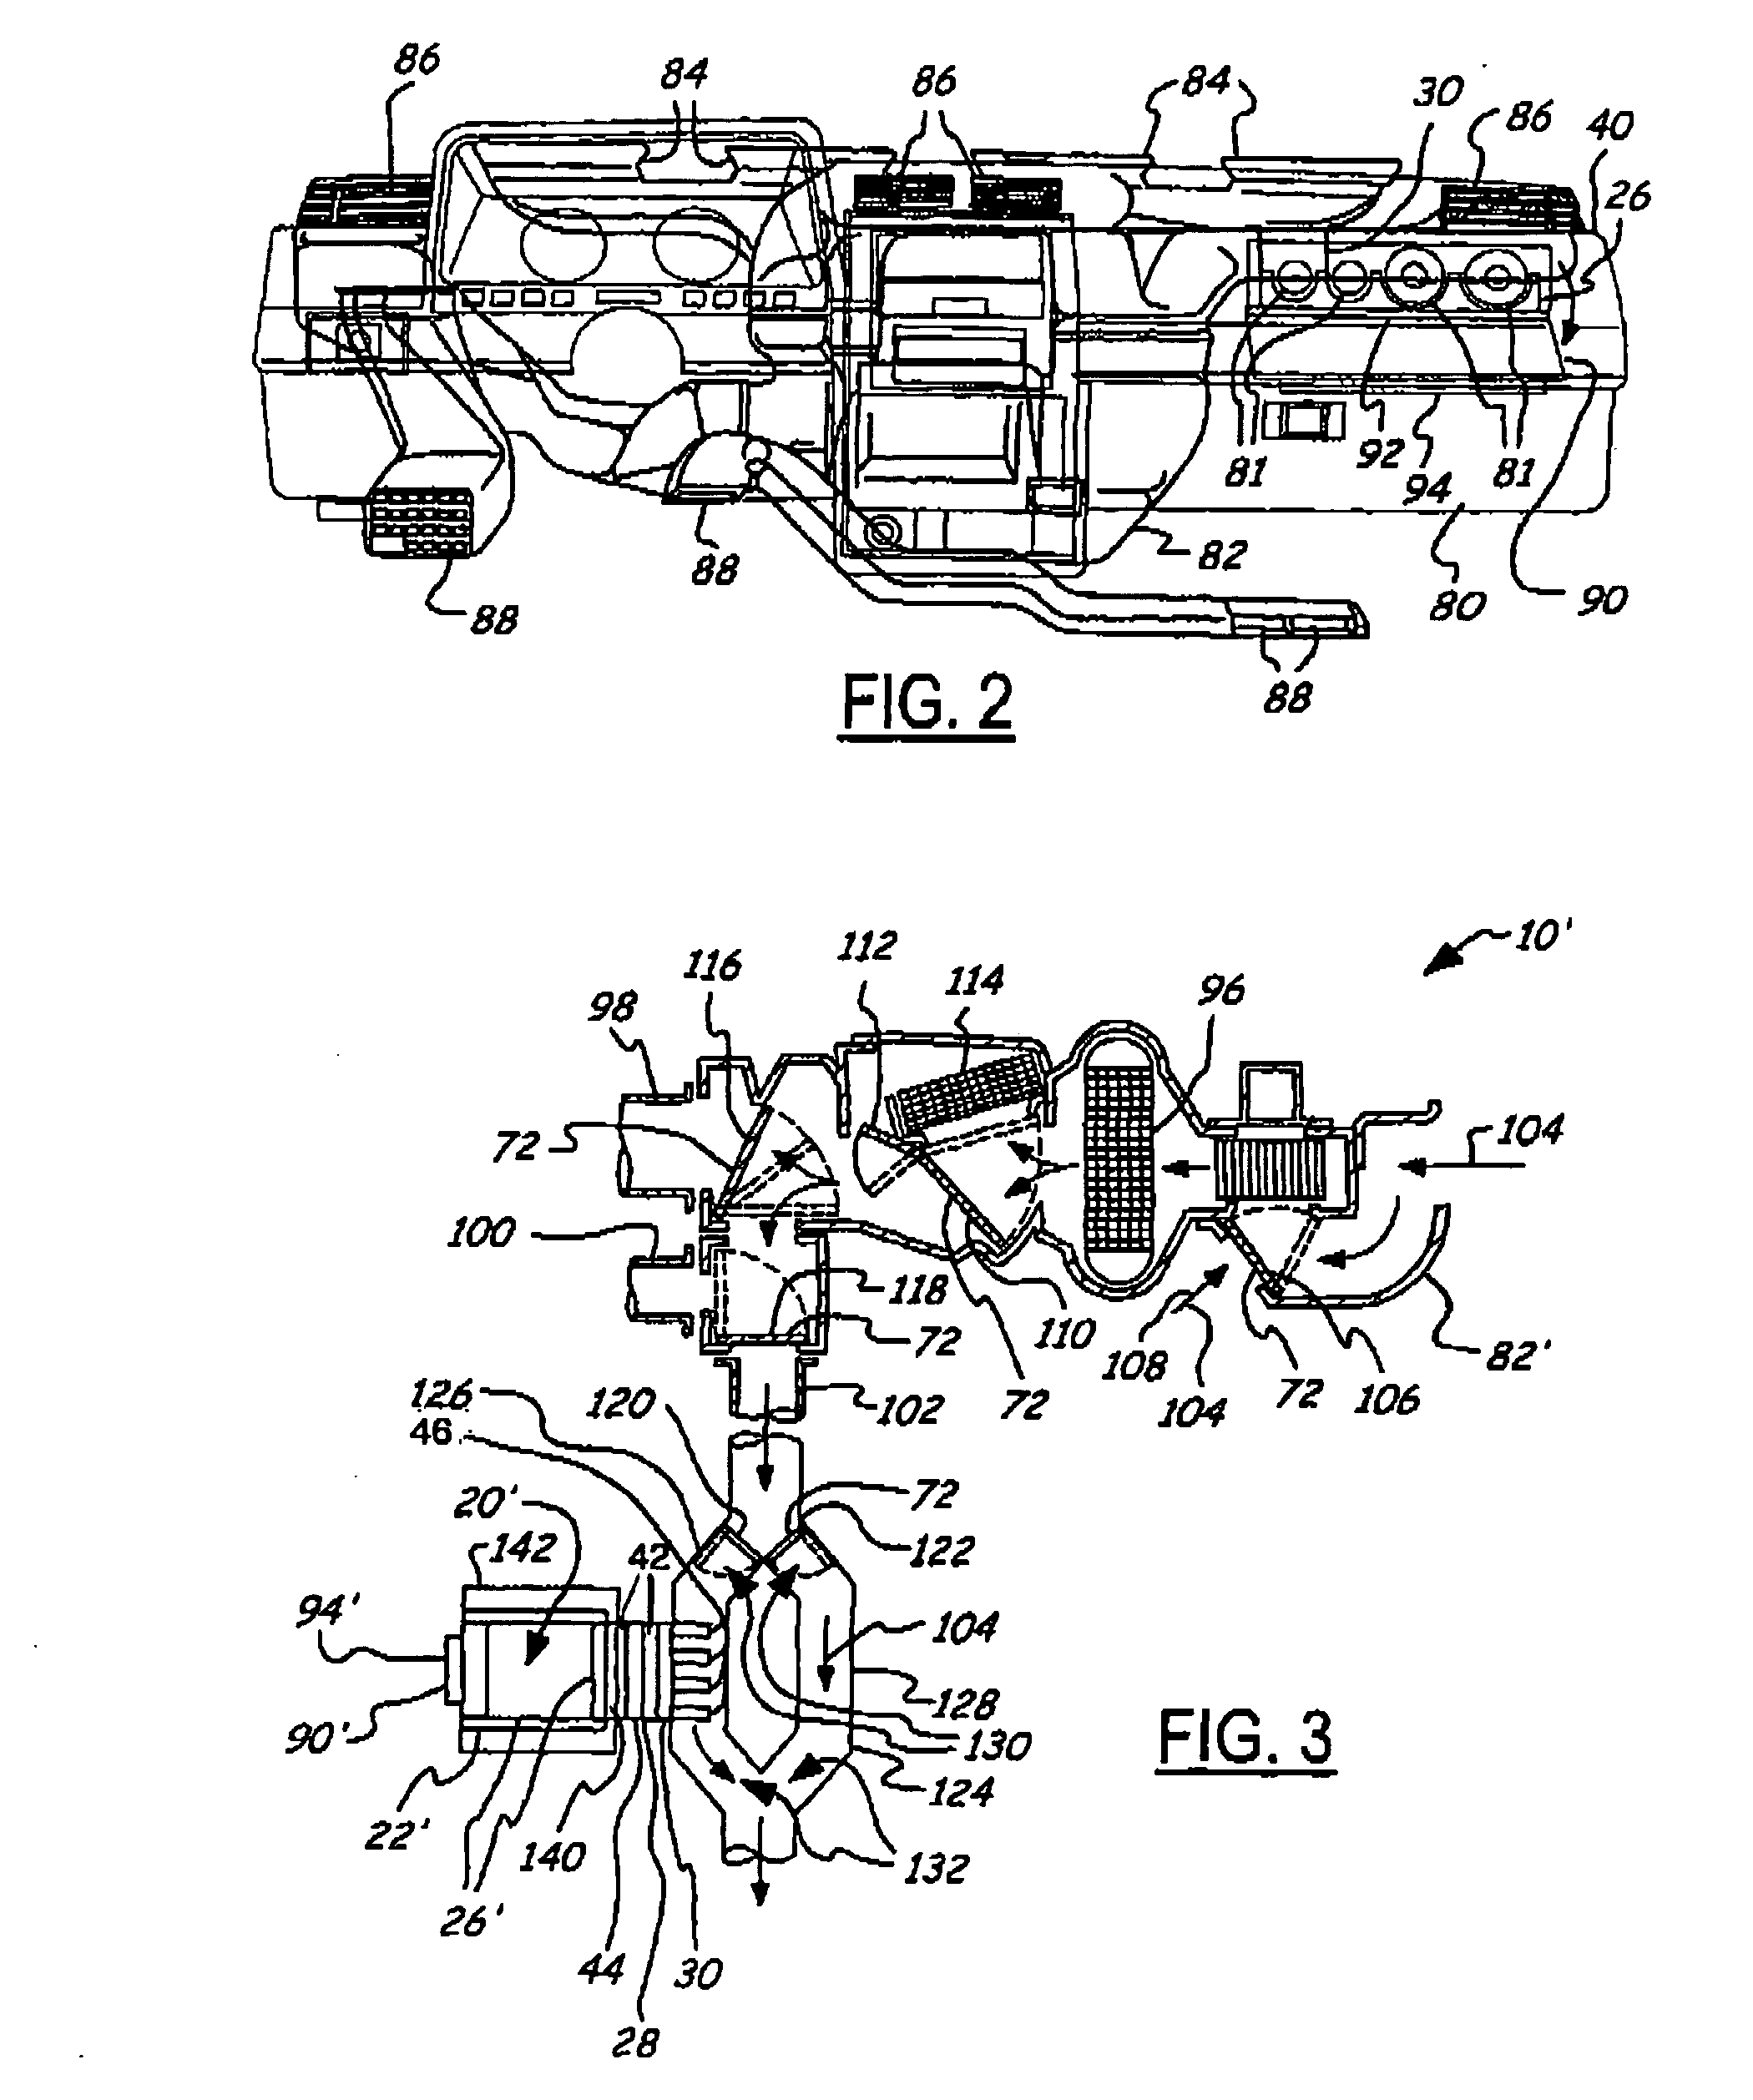 Thermally controlled storage space system for an interior cabin of a vehicle